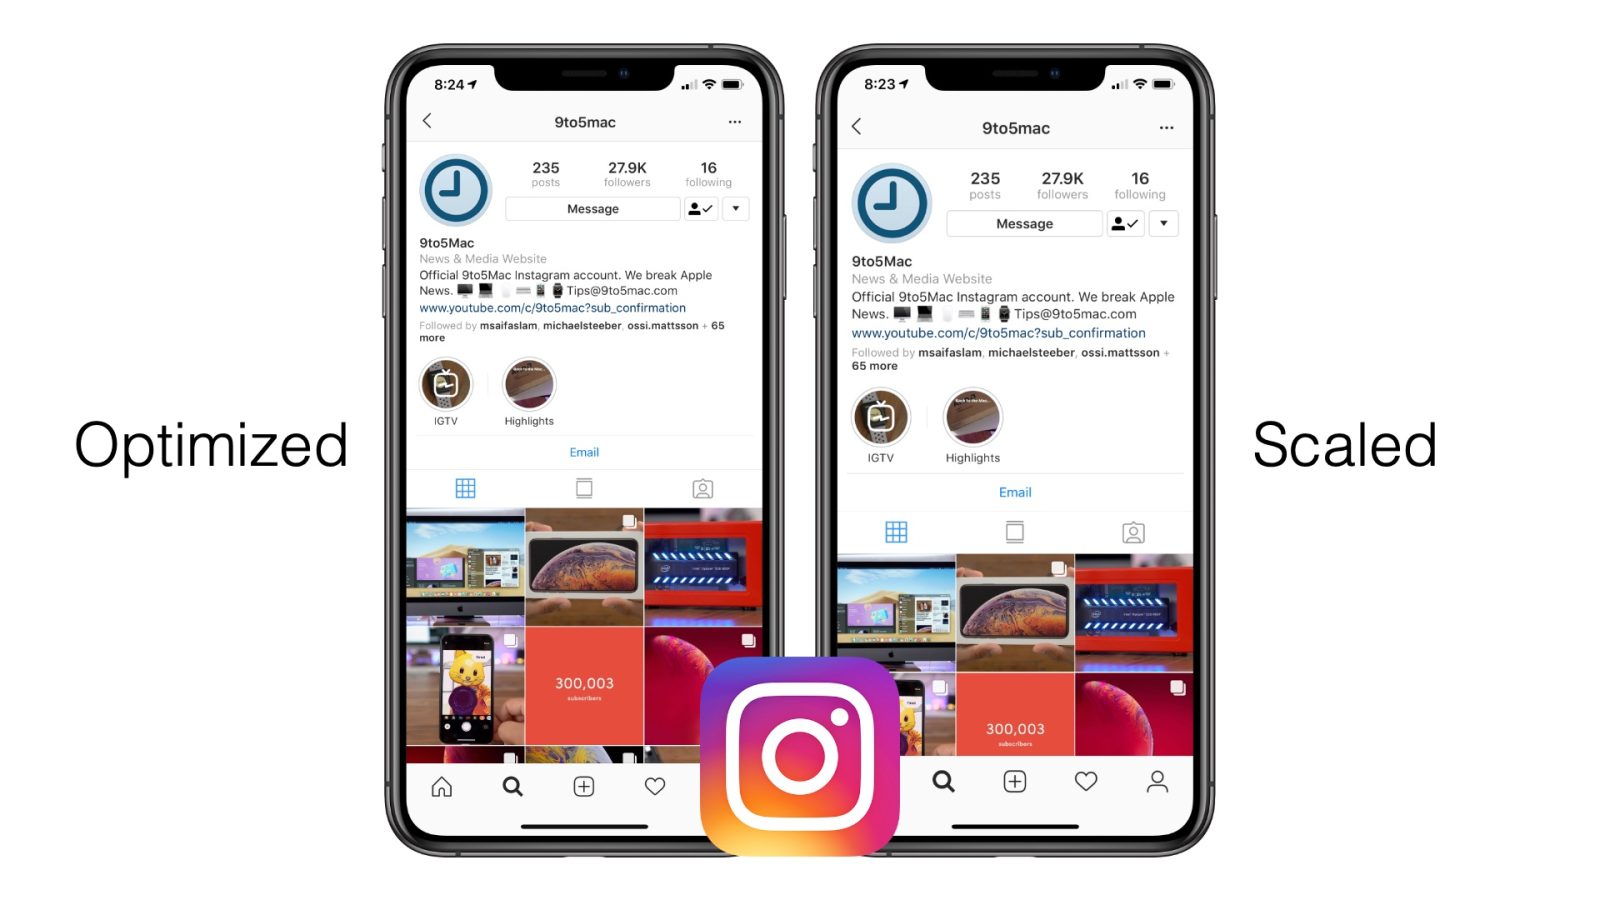 instagram for iphone xr and xs max no longer optimized here s why - app to increase instagram followers for iphone